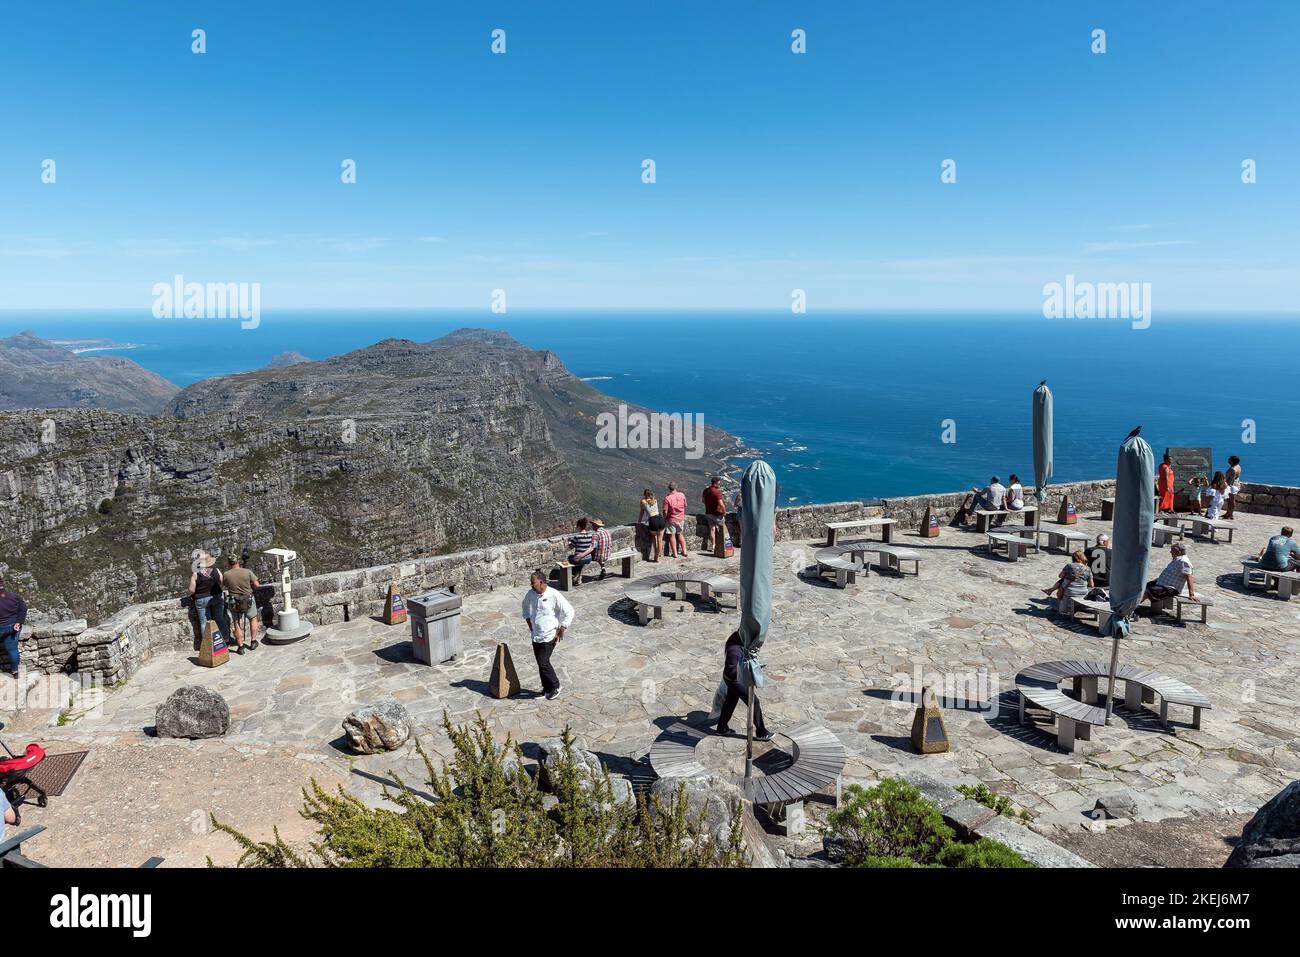 Cape Town, South Africa - Sep 14, 2022: Tourists are visible at a viewpoint on Table Mountain in Cape Town Stock Photo